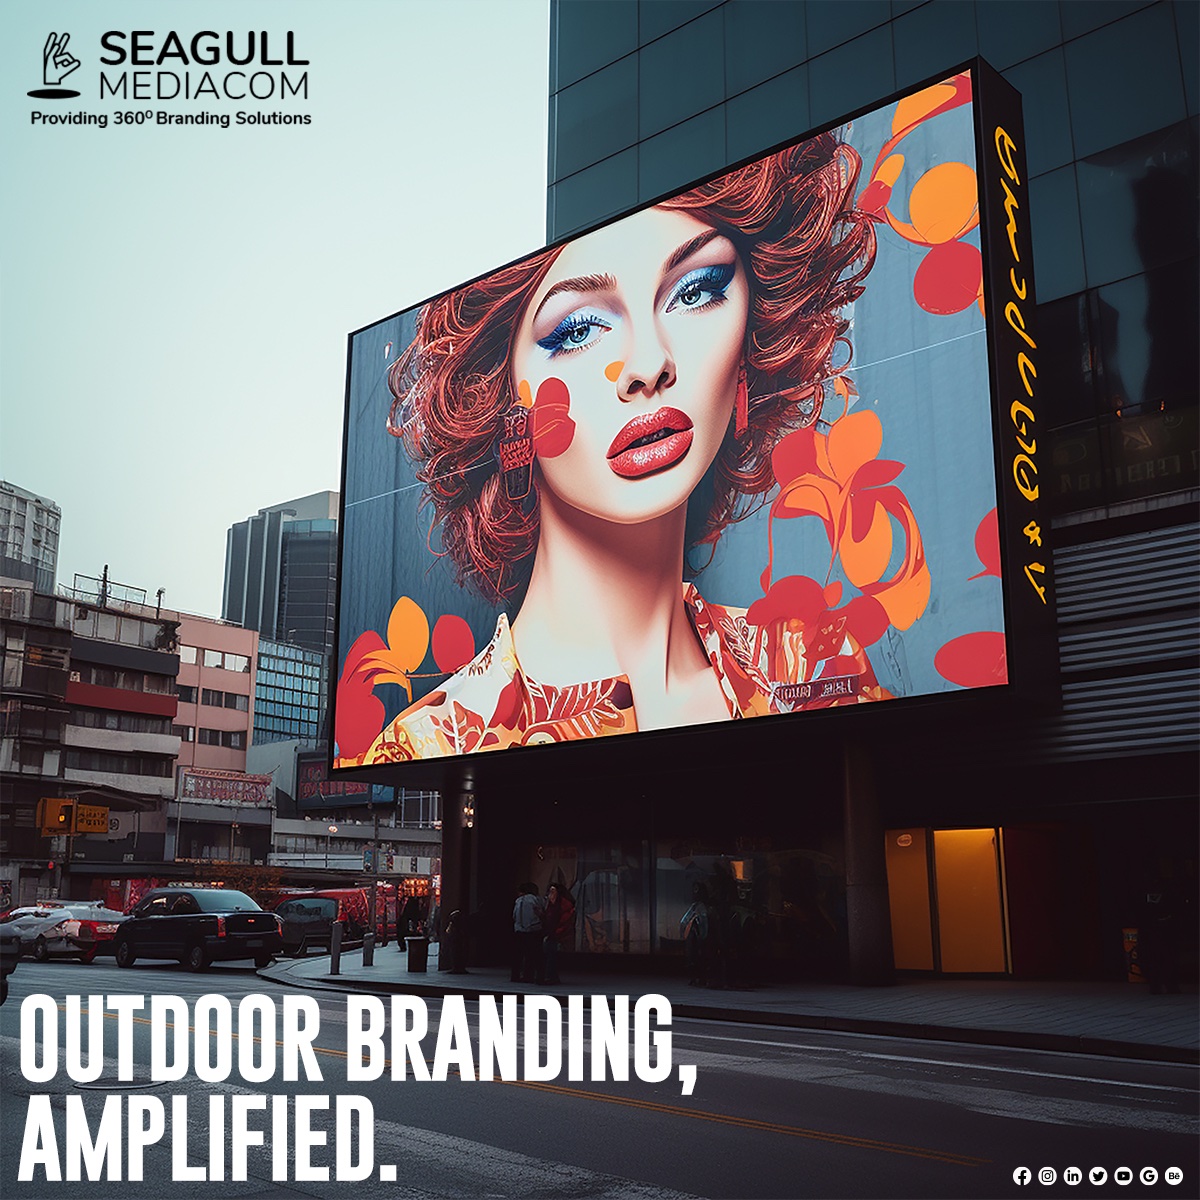 Outdoor branding has evolved over the years and has changed the perception of how people view a brand.

#seagull #seagullmediacom #advertising #performancemarketing #instorebranding #logodesigns #magazinedesigns #advertisement #advertisingagency #graphicdesign #branding